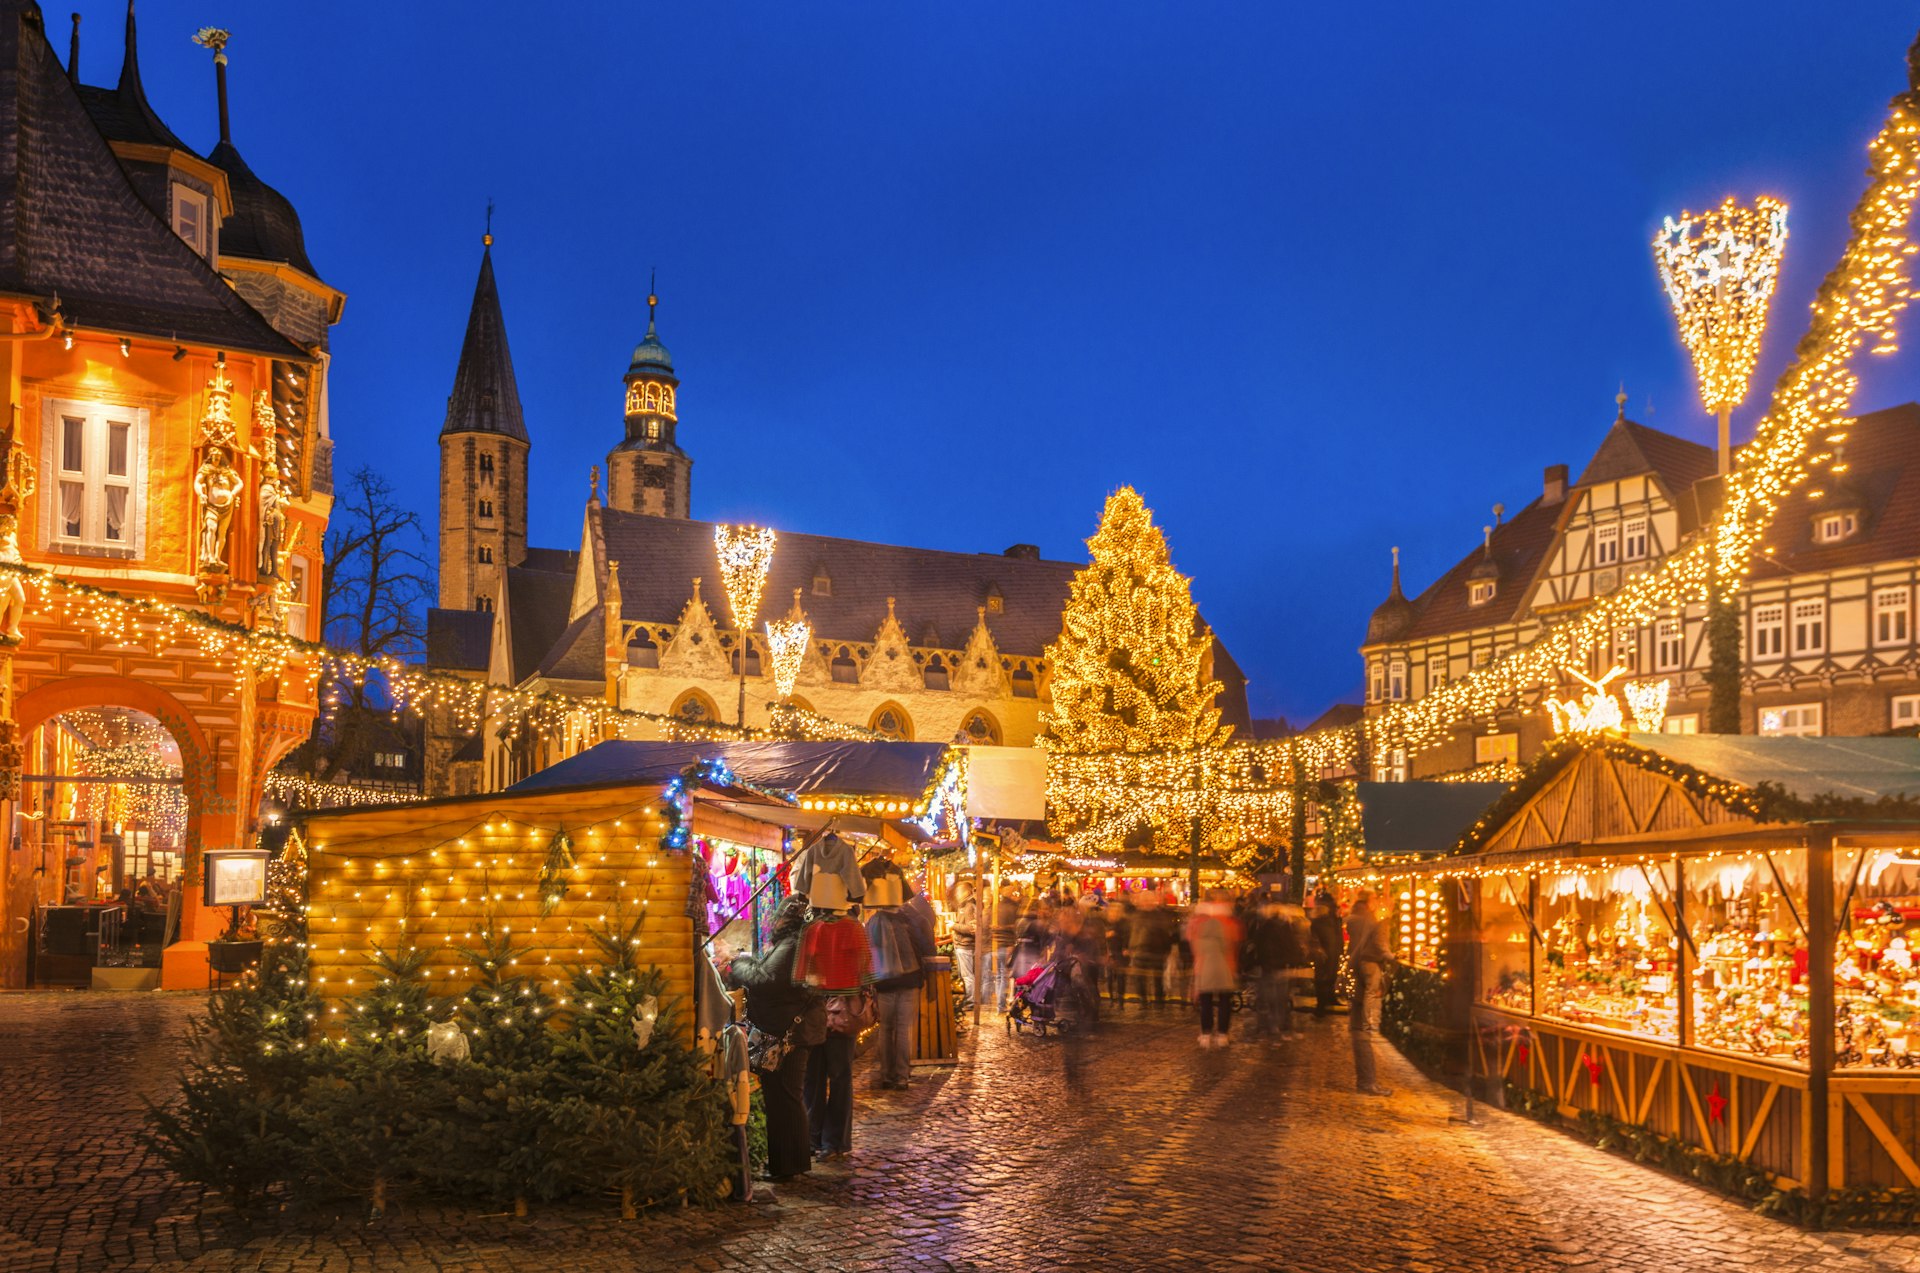 The traditional Christmas market on the historic Market Square in Goslar, Germany at dusk.